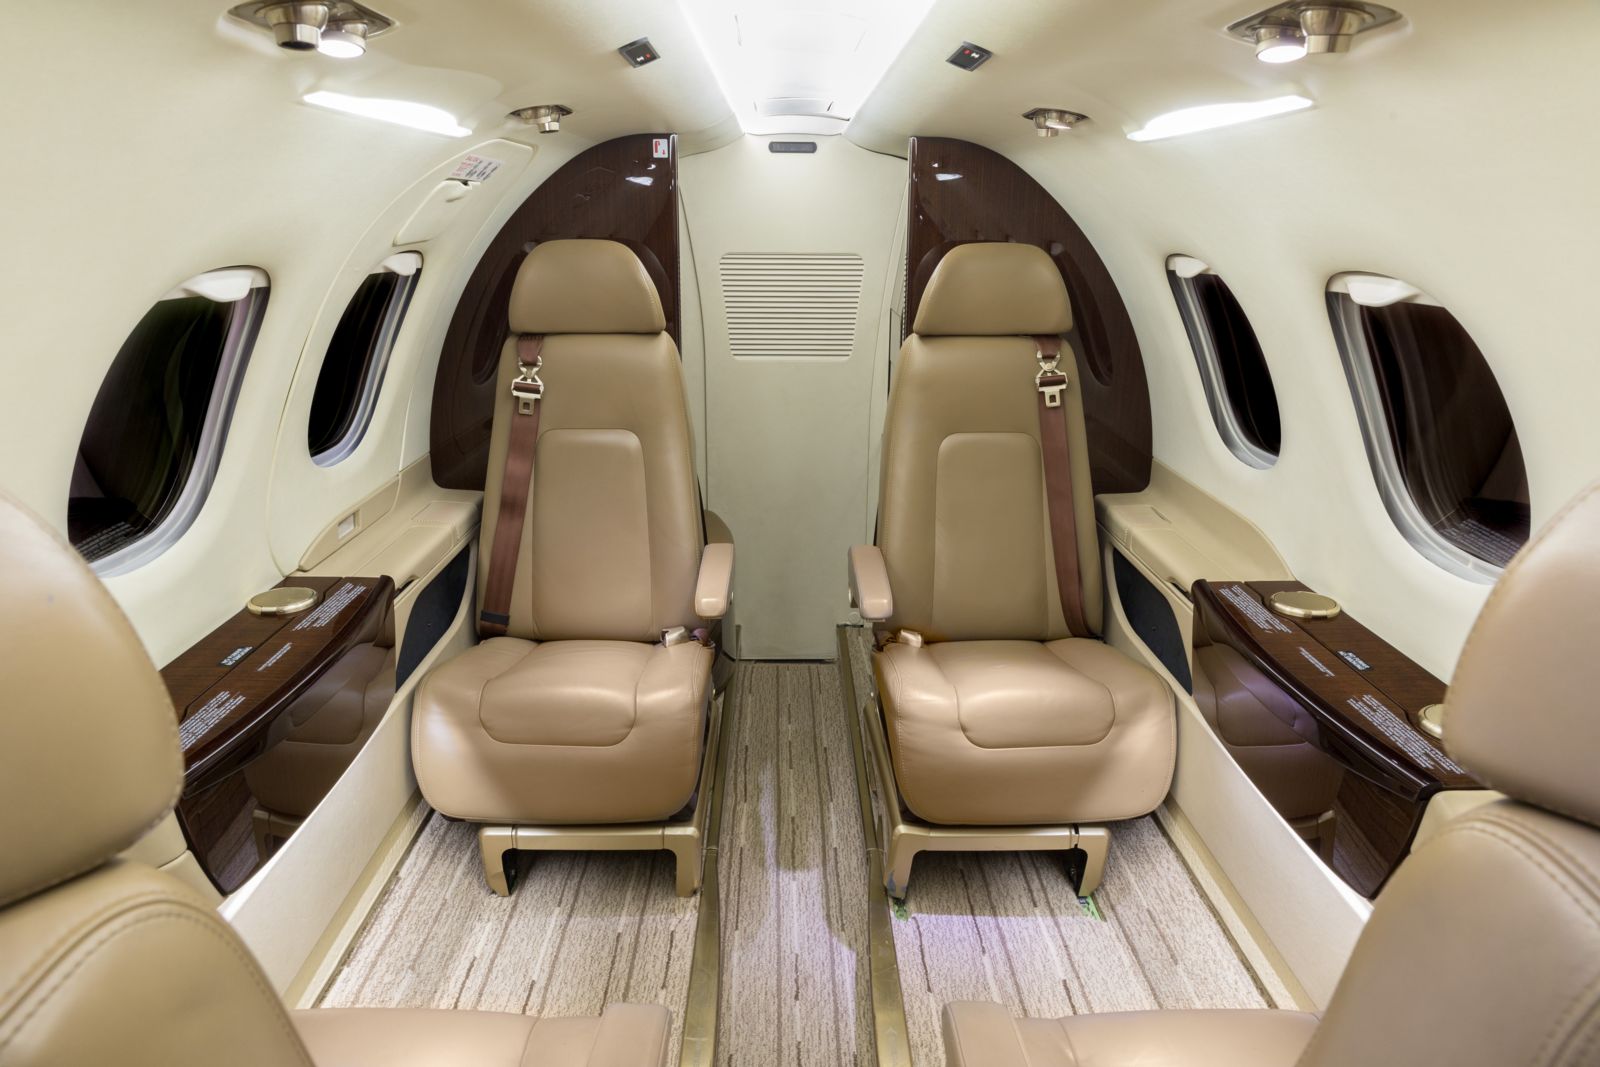 Embraer Phenom 100  S/N 50000347 for sale | gallery image: /userfiles/images/Phenom100_sn347/aft.jpg